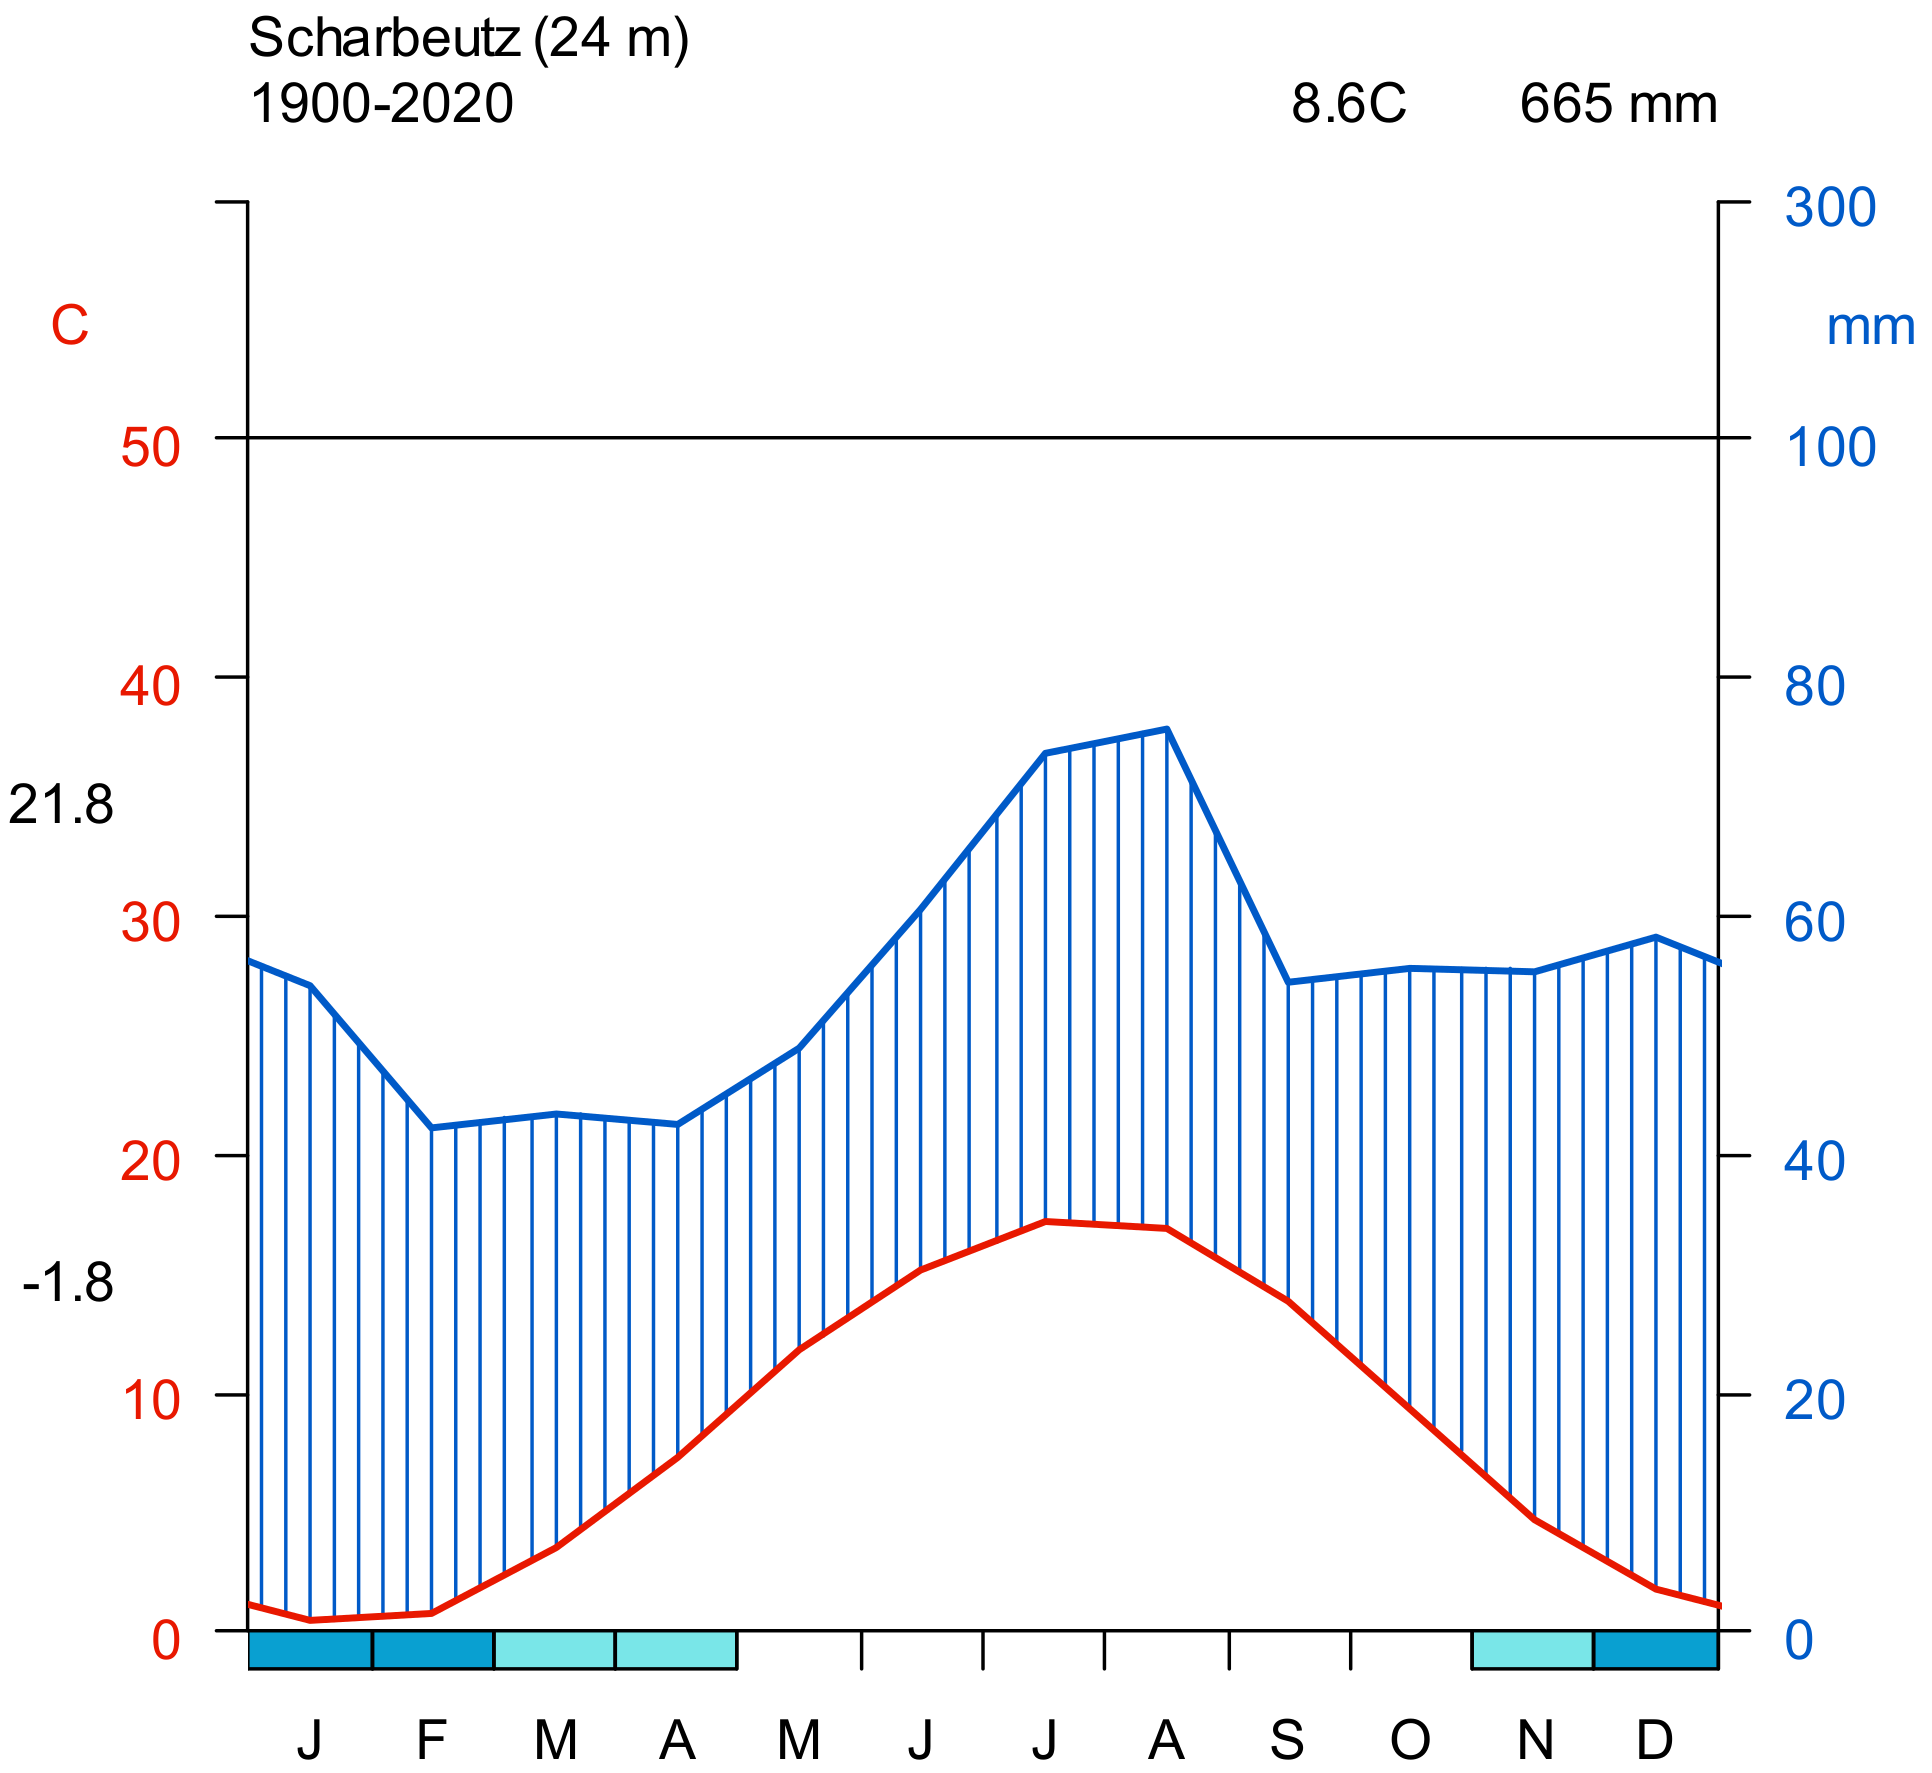 boreal forest climate graph